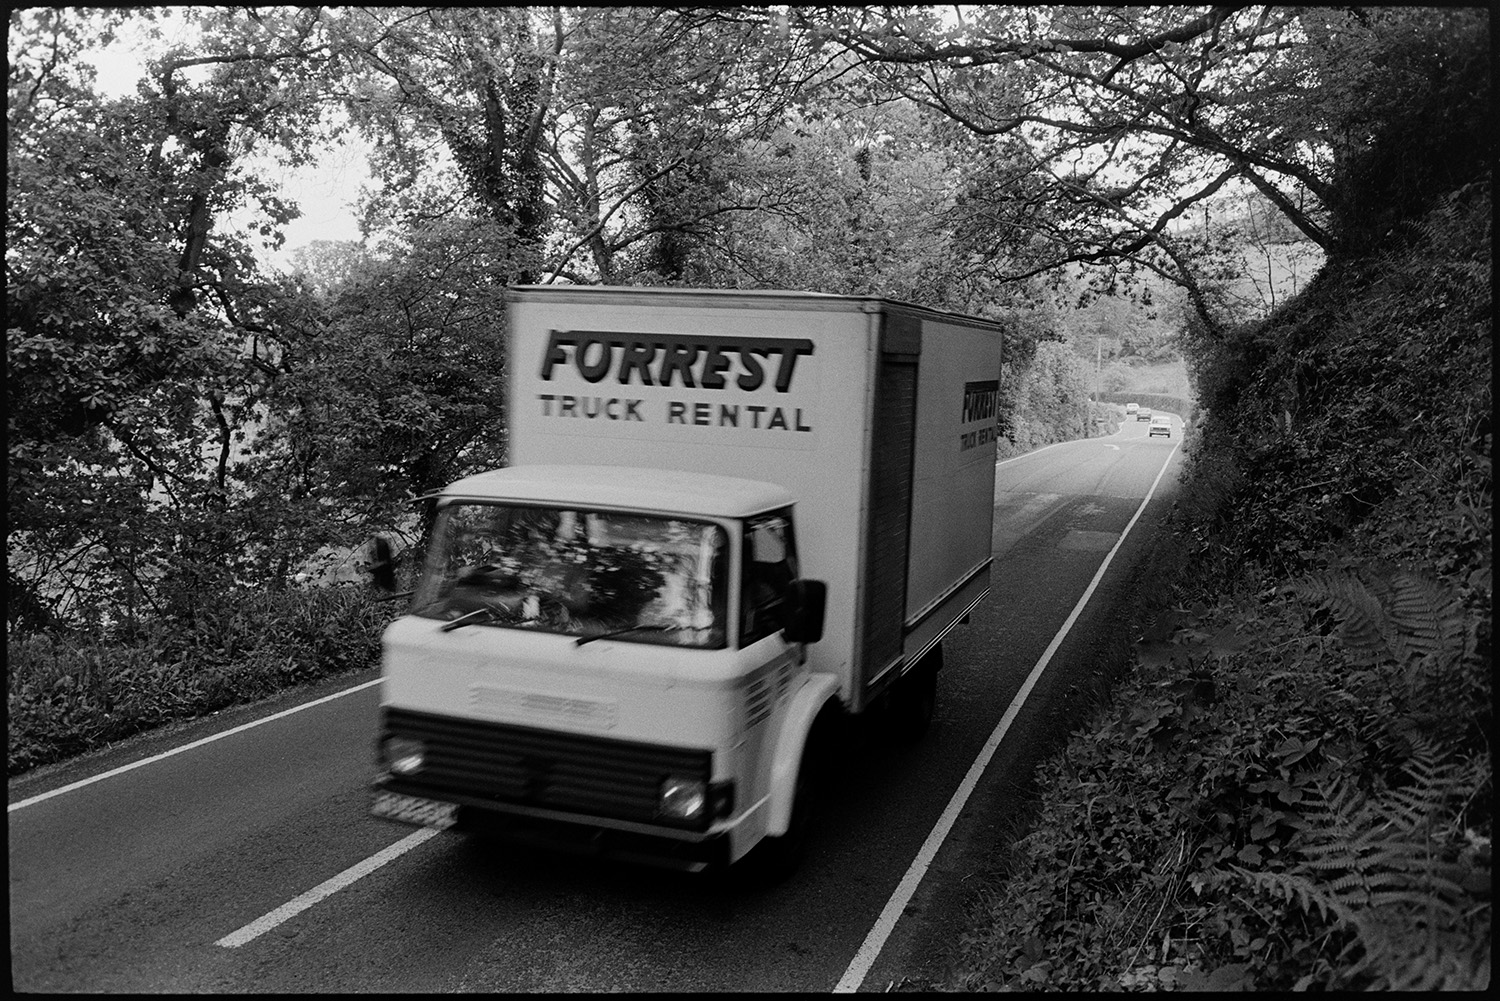 Lorries and cars on road.
[A Forrest truck rental lorry driving up Kingford Hill, High Bickington.]